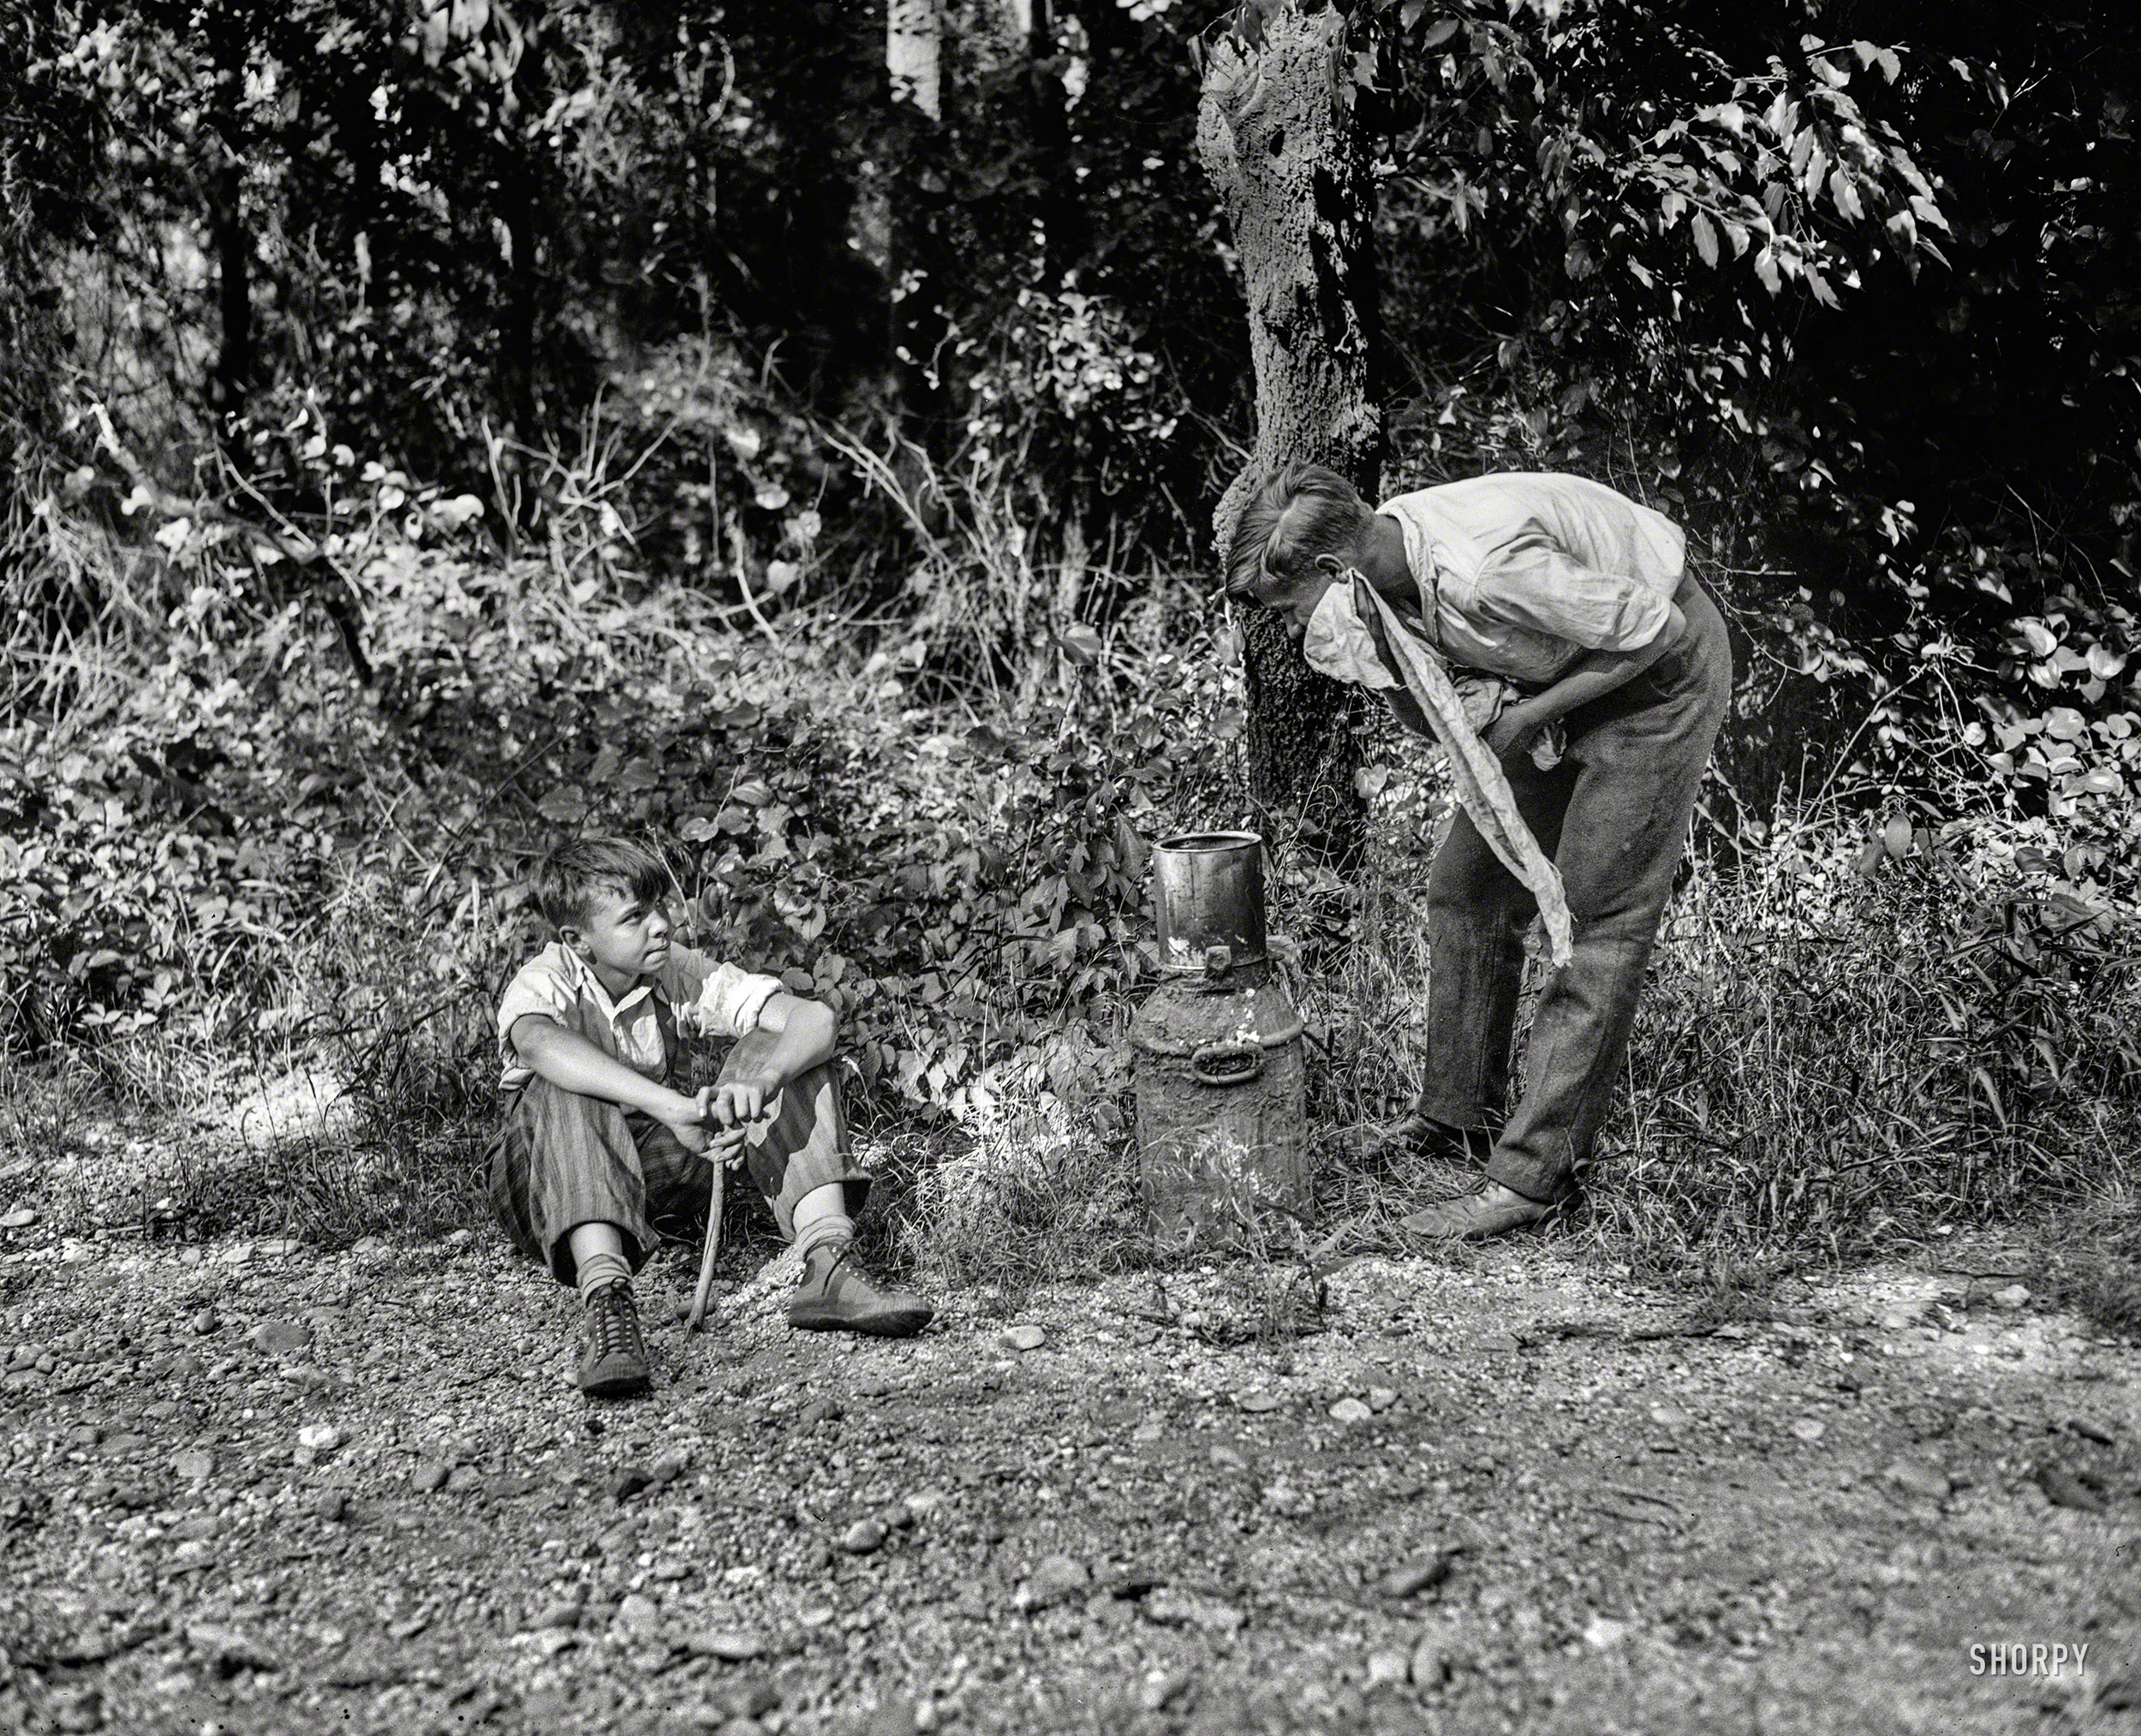 1932. Washington, D.C., or vicinity. "NO CAPTION (Boys camped in woods)." Our second glimpse of these juvenile vagabonds. Harris & Ewing. View full size.